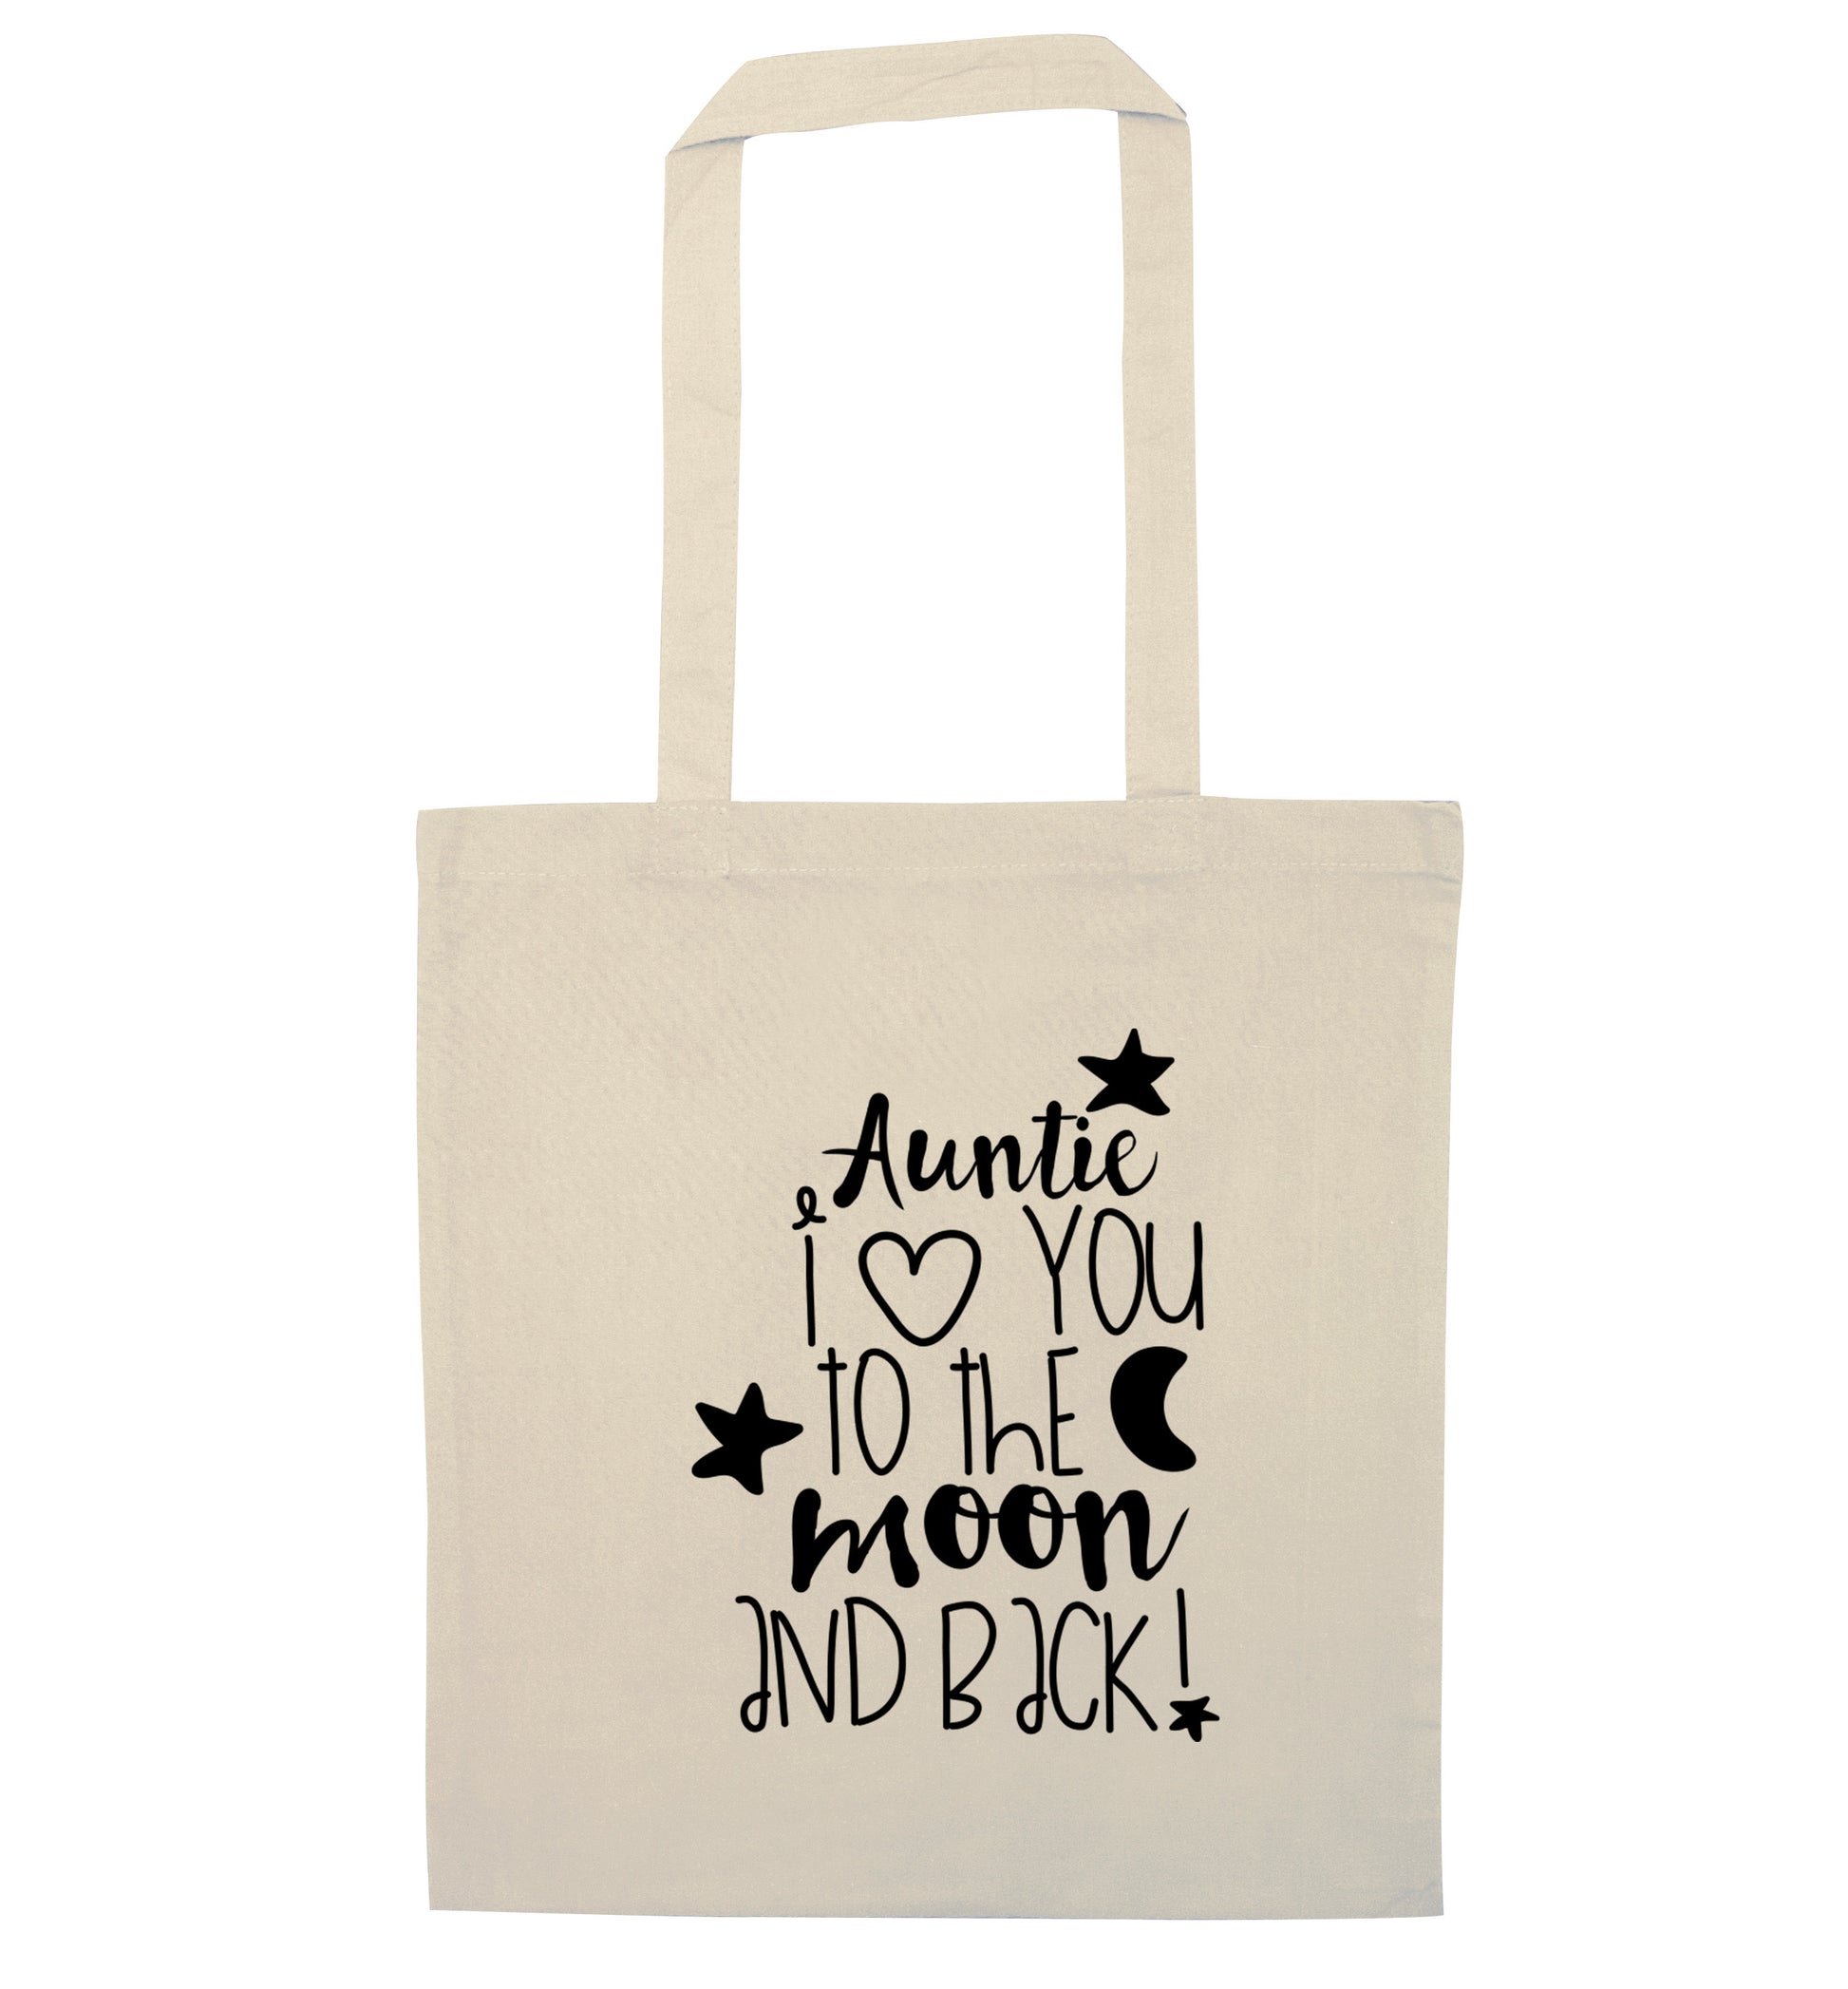 Auntie I love you to the moon and back natural tote bag